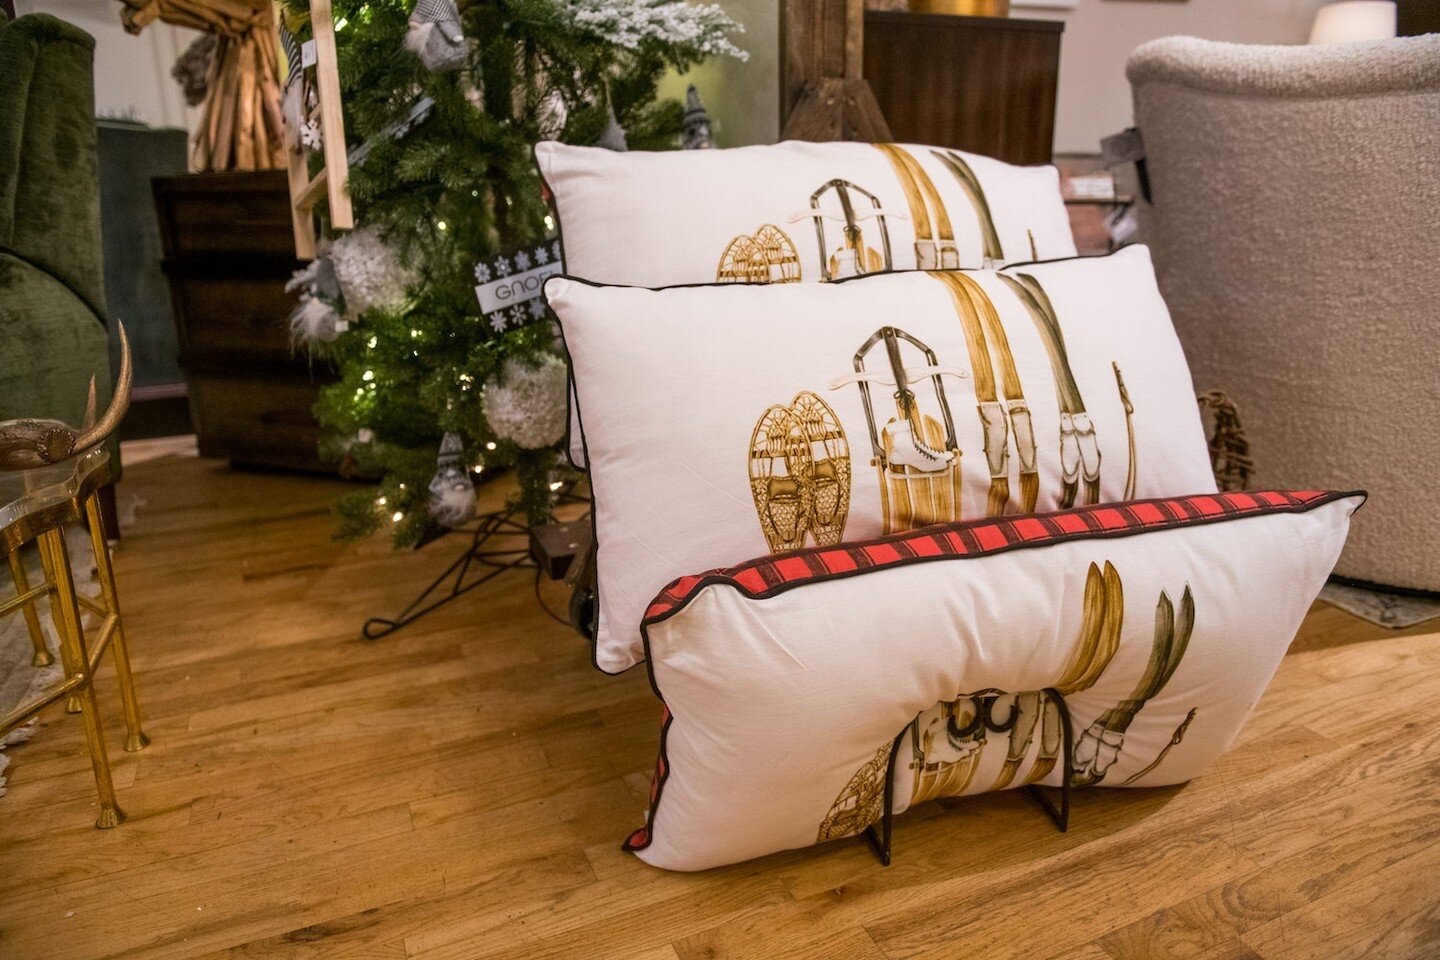 A little hygge for your home!
.
Get cozy with winter-themed pillows, Christmas decorations, candles, and home decor from Boxwoods!
.
Store hours:
Wednesday-Friday 12:30-5:00 pm
Saturday 12-4:00 pm
Monday and Tuesday by appointment
.
.
.
.
#boxwoodshe